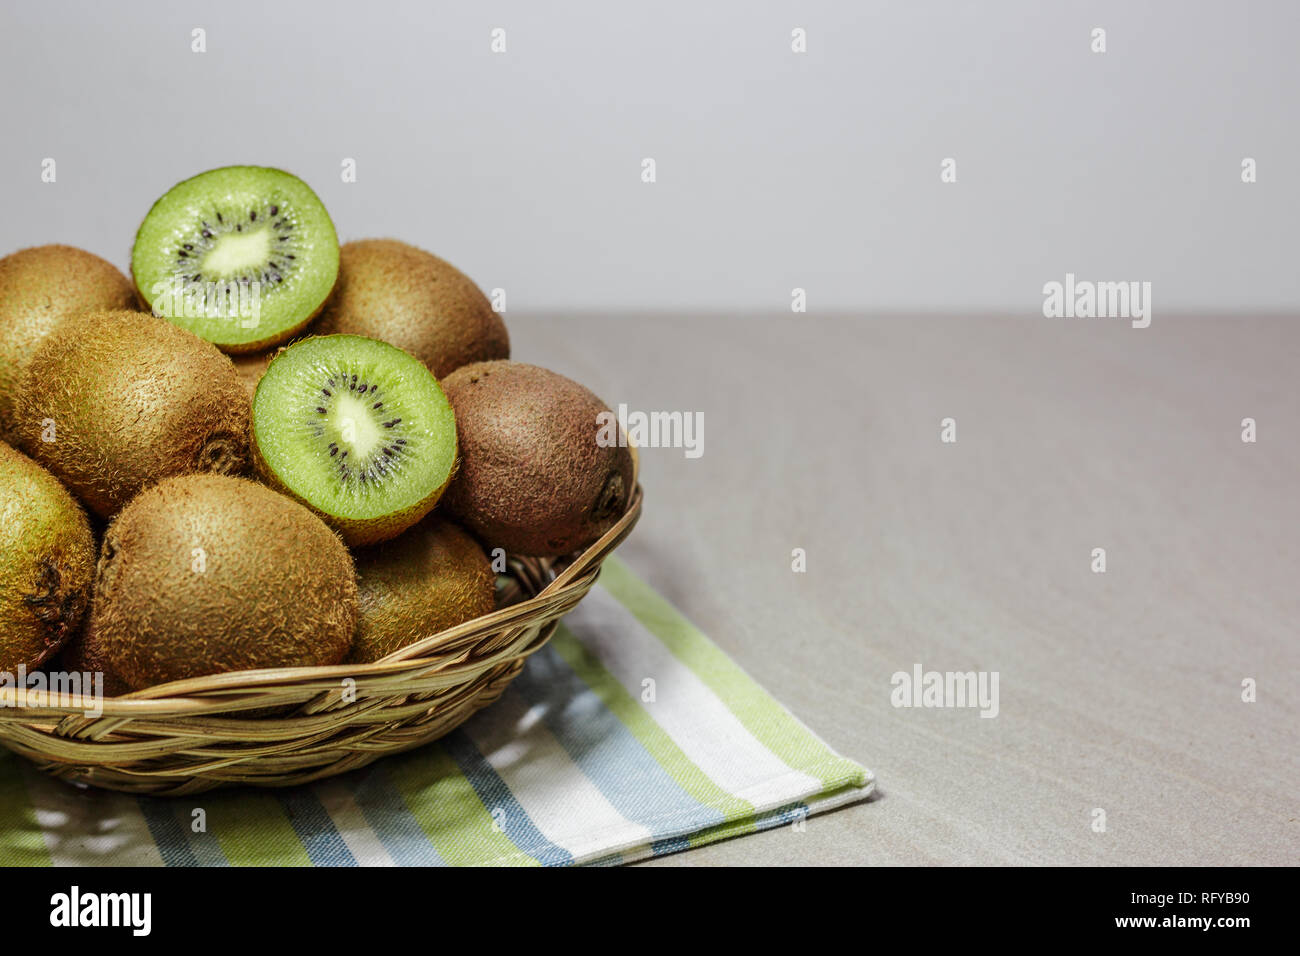 Ripe kiwi fruits in a basket. Healthy nutrition concept. Stock Photo